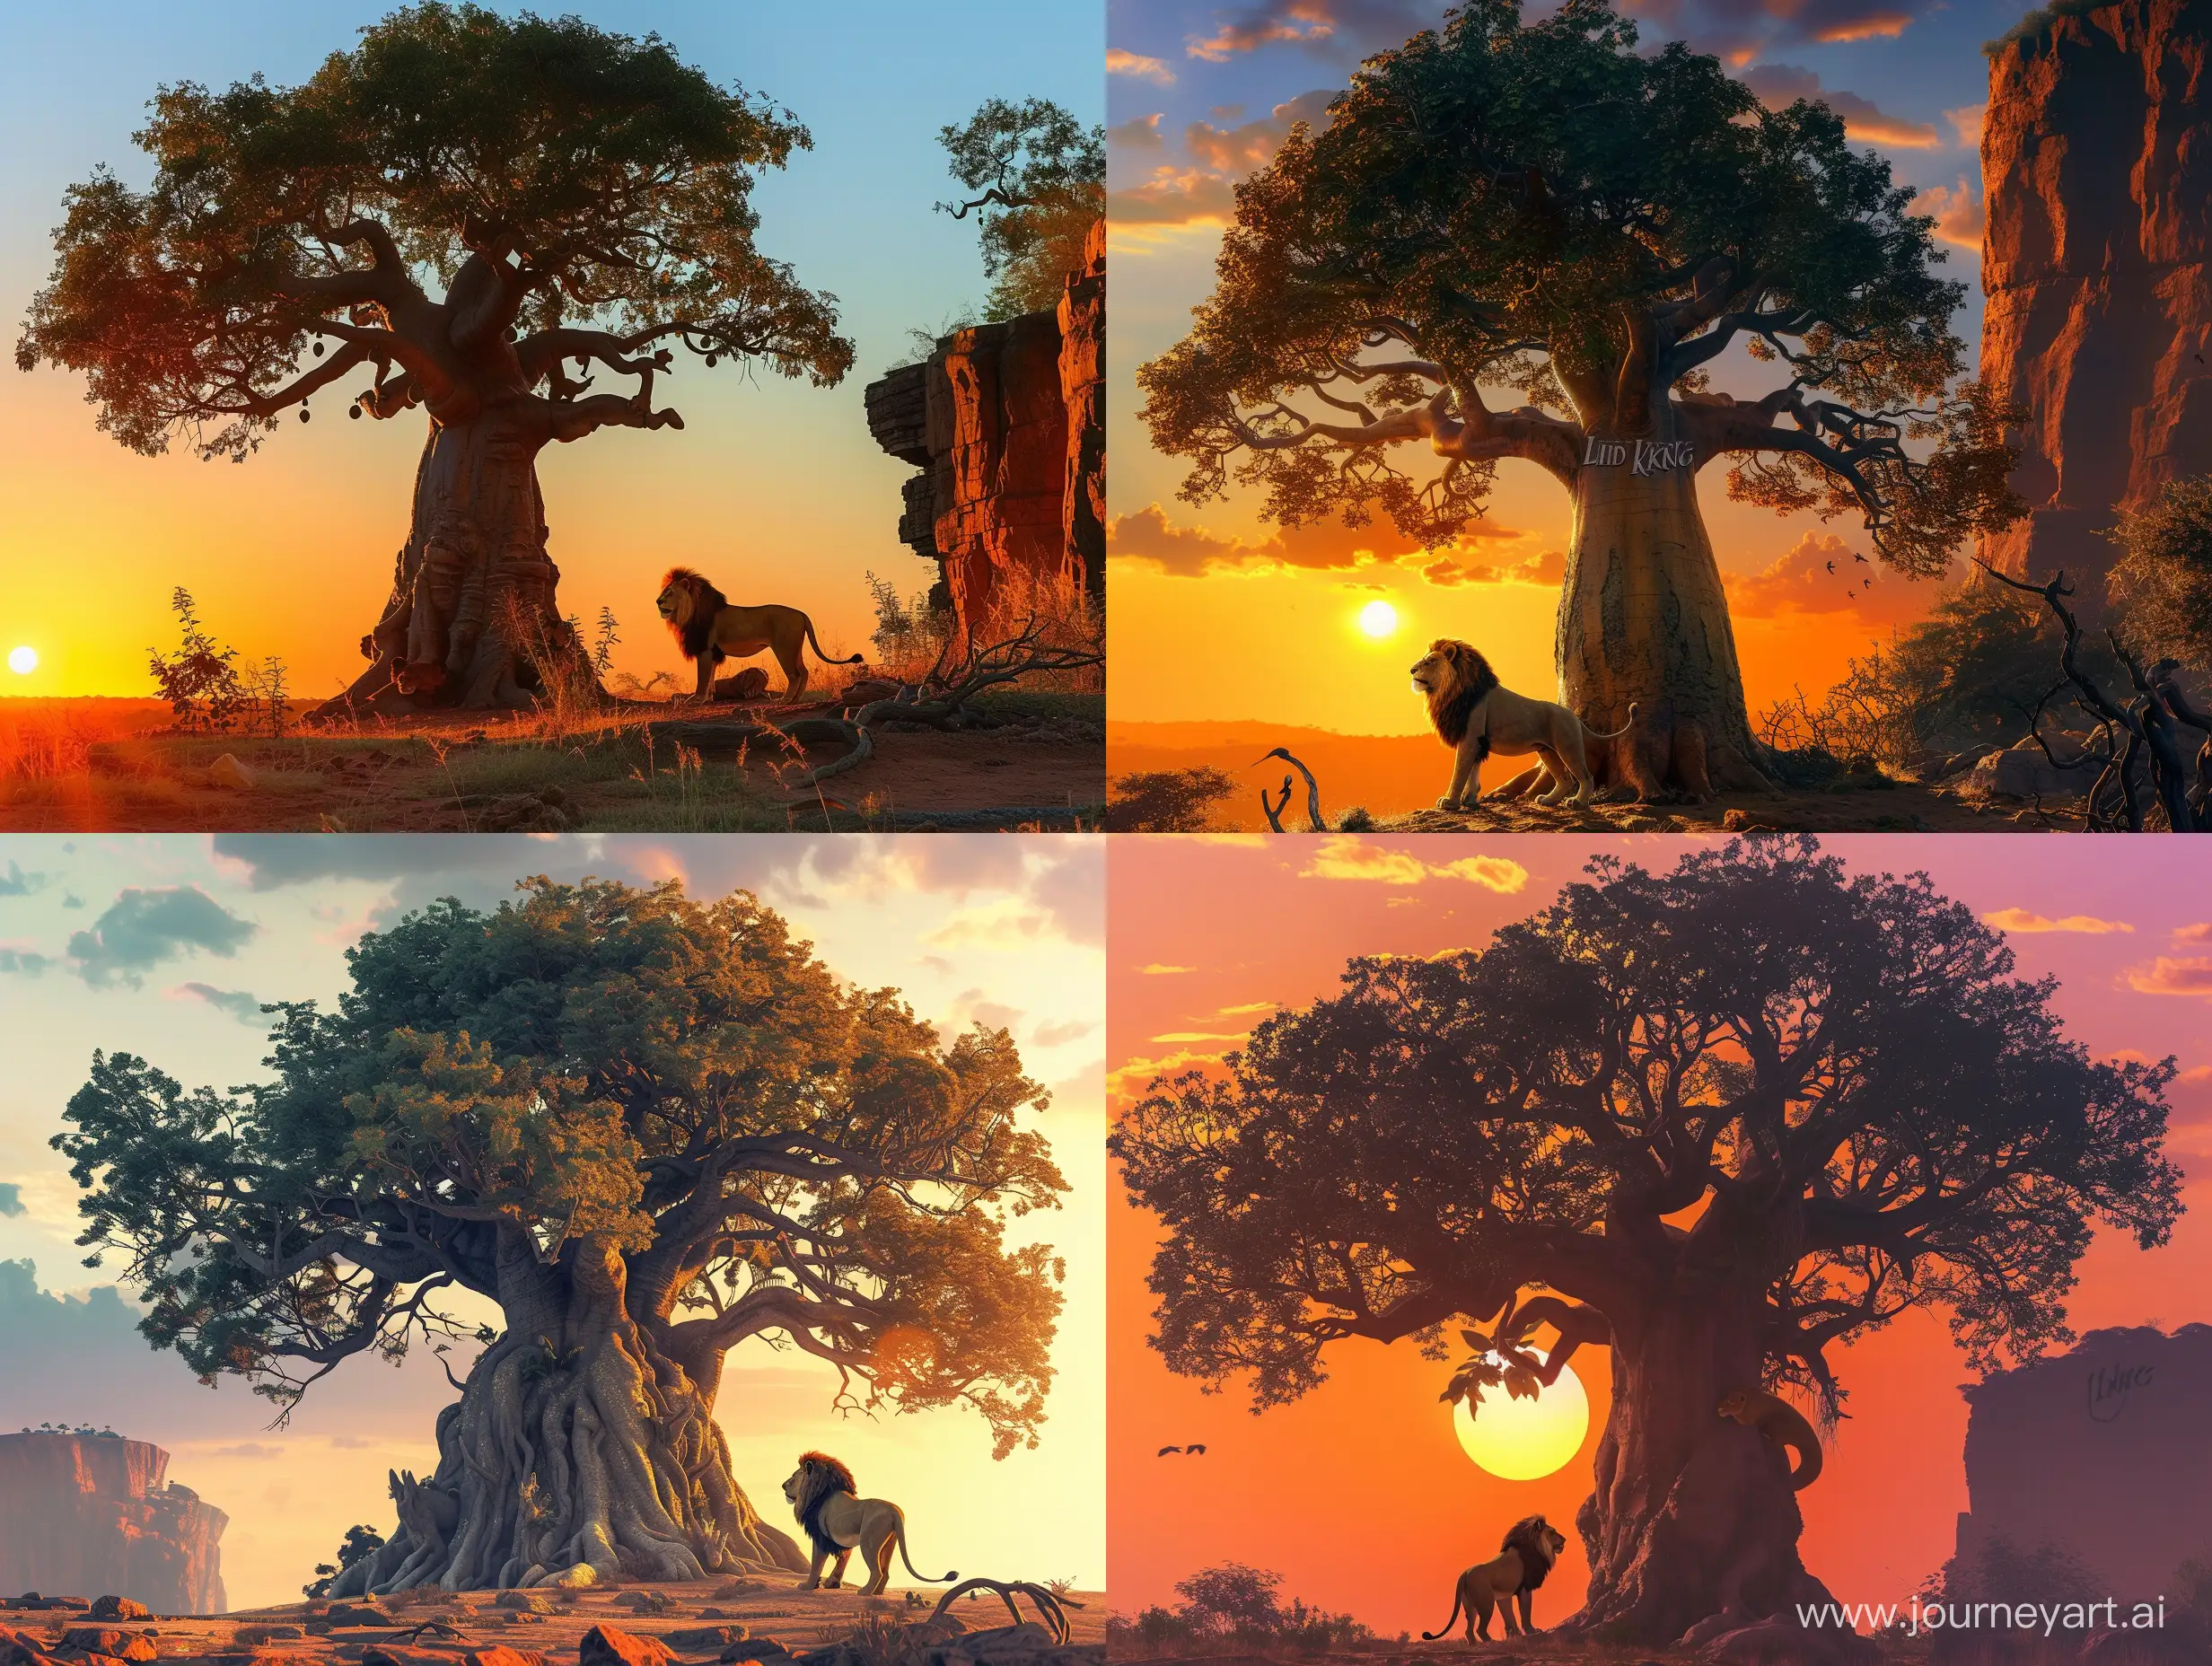 lion king sunrise in the background. There is an average sized baobab tree in the middle. There is a lion standing next to the tree. Also there is the signature lion king cliff on the side of the picture.